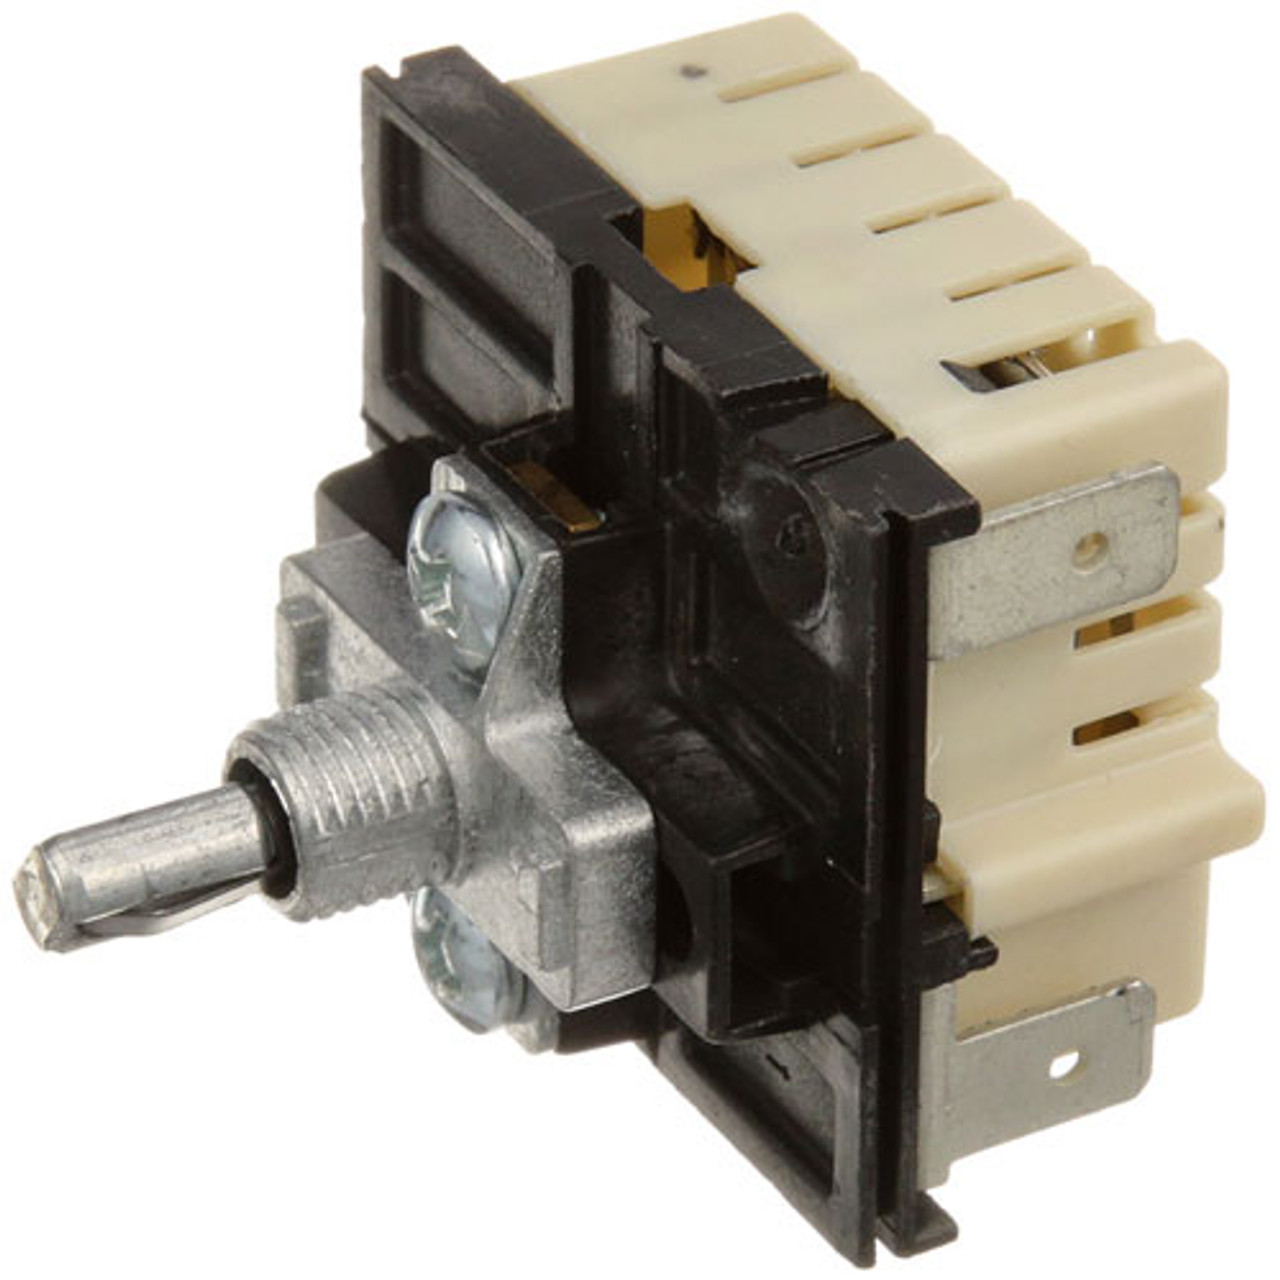 Infinite Switch - Replacement Part For Delfield 713(120V)